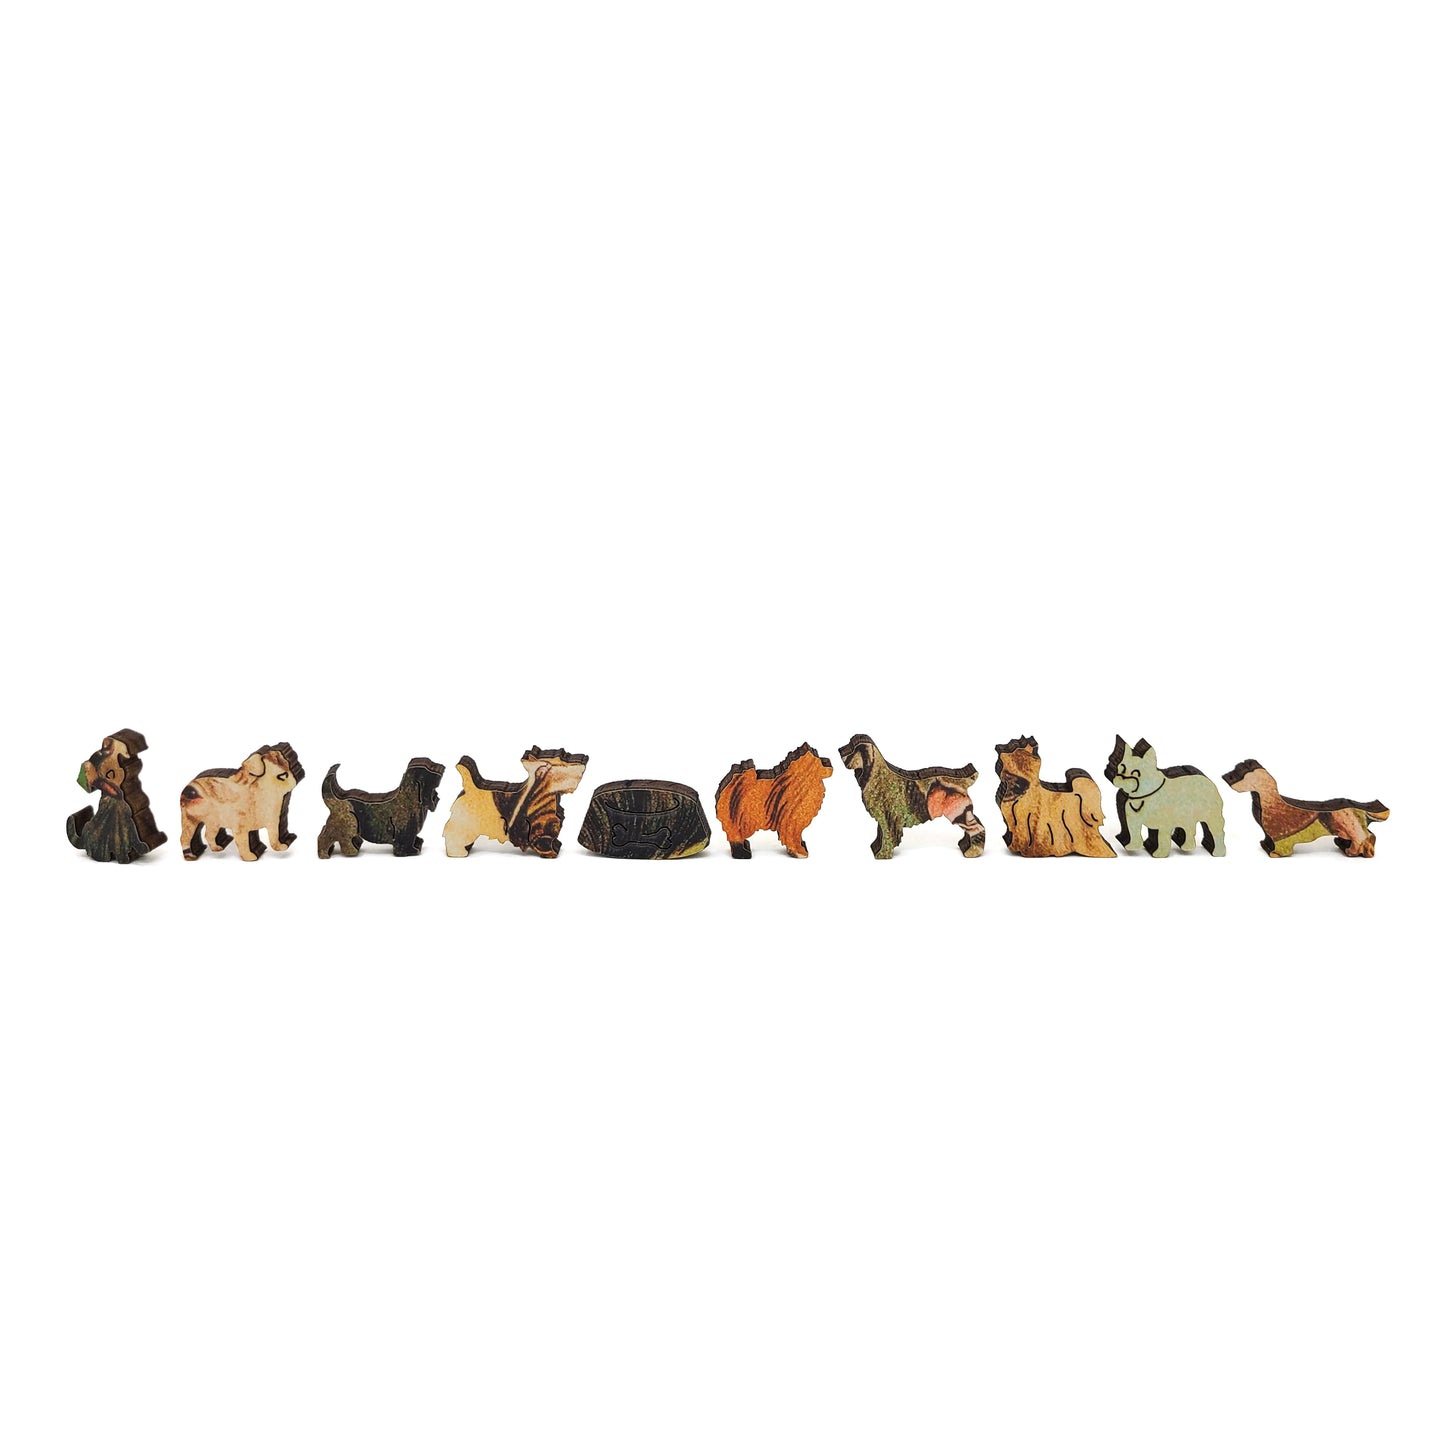 Wooden Jigsaw Puzzle with Uniquely Shaped Pieces for Adults - 306 Pieces - Furry Friends